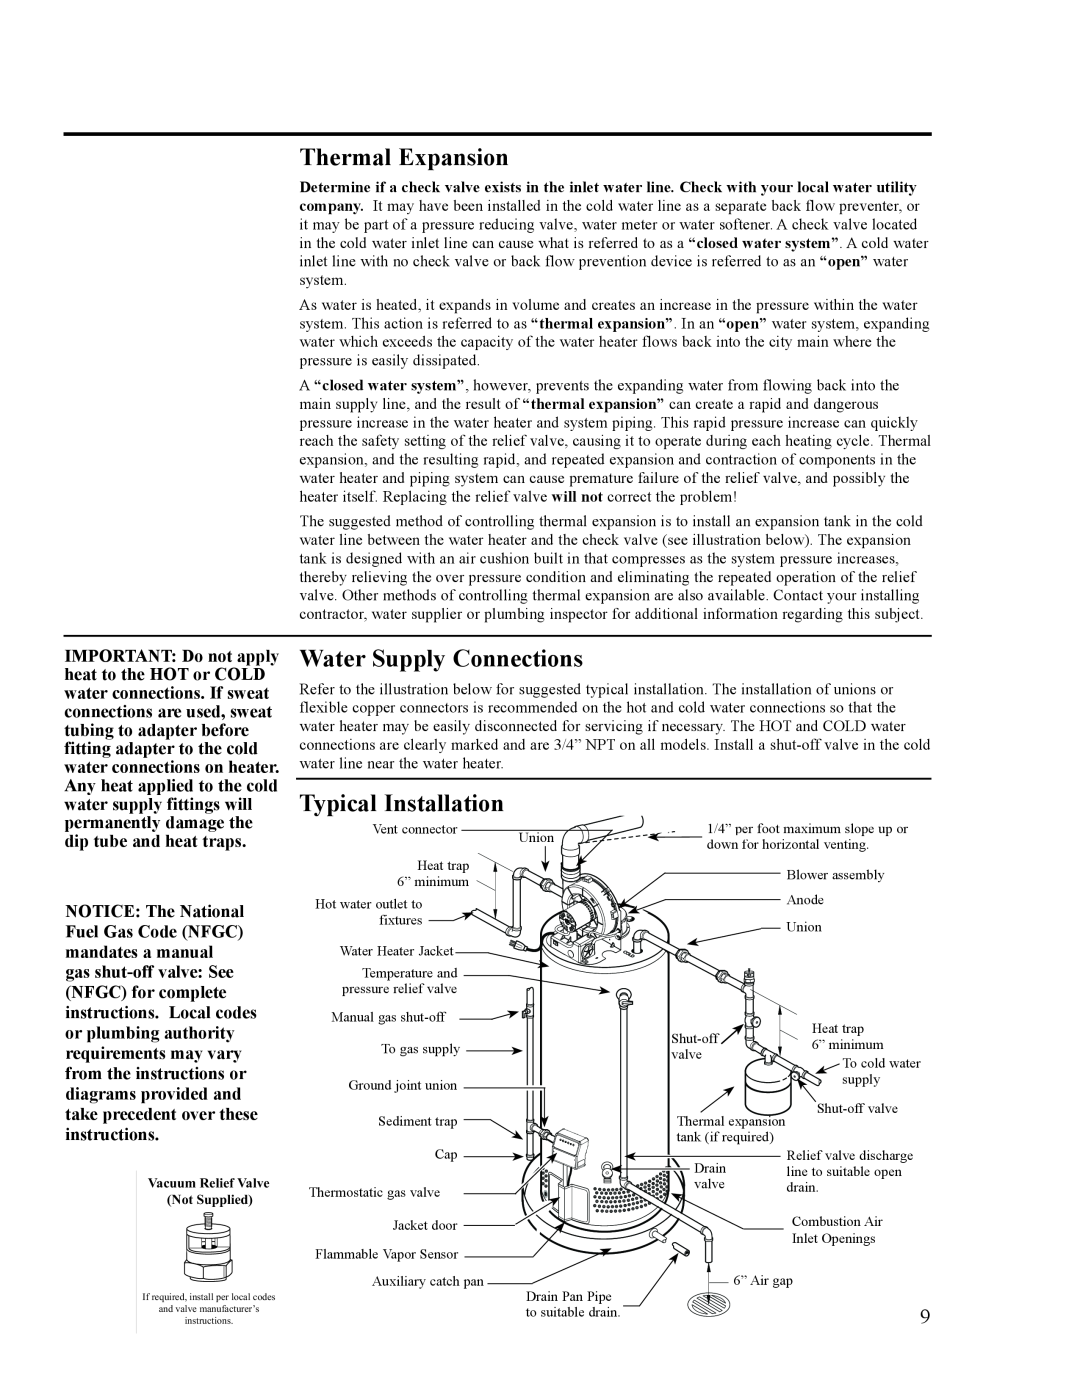 Ruud AP14236 installation instructions Thermal Expansion, Water Supply Connections, Typical Installation 